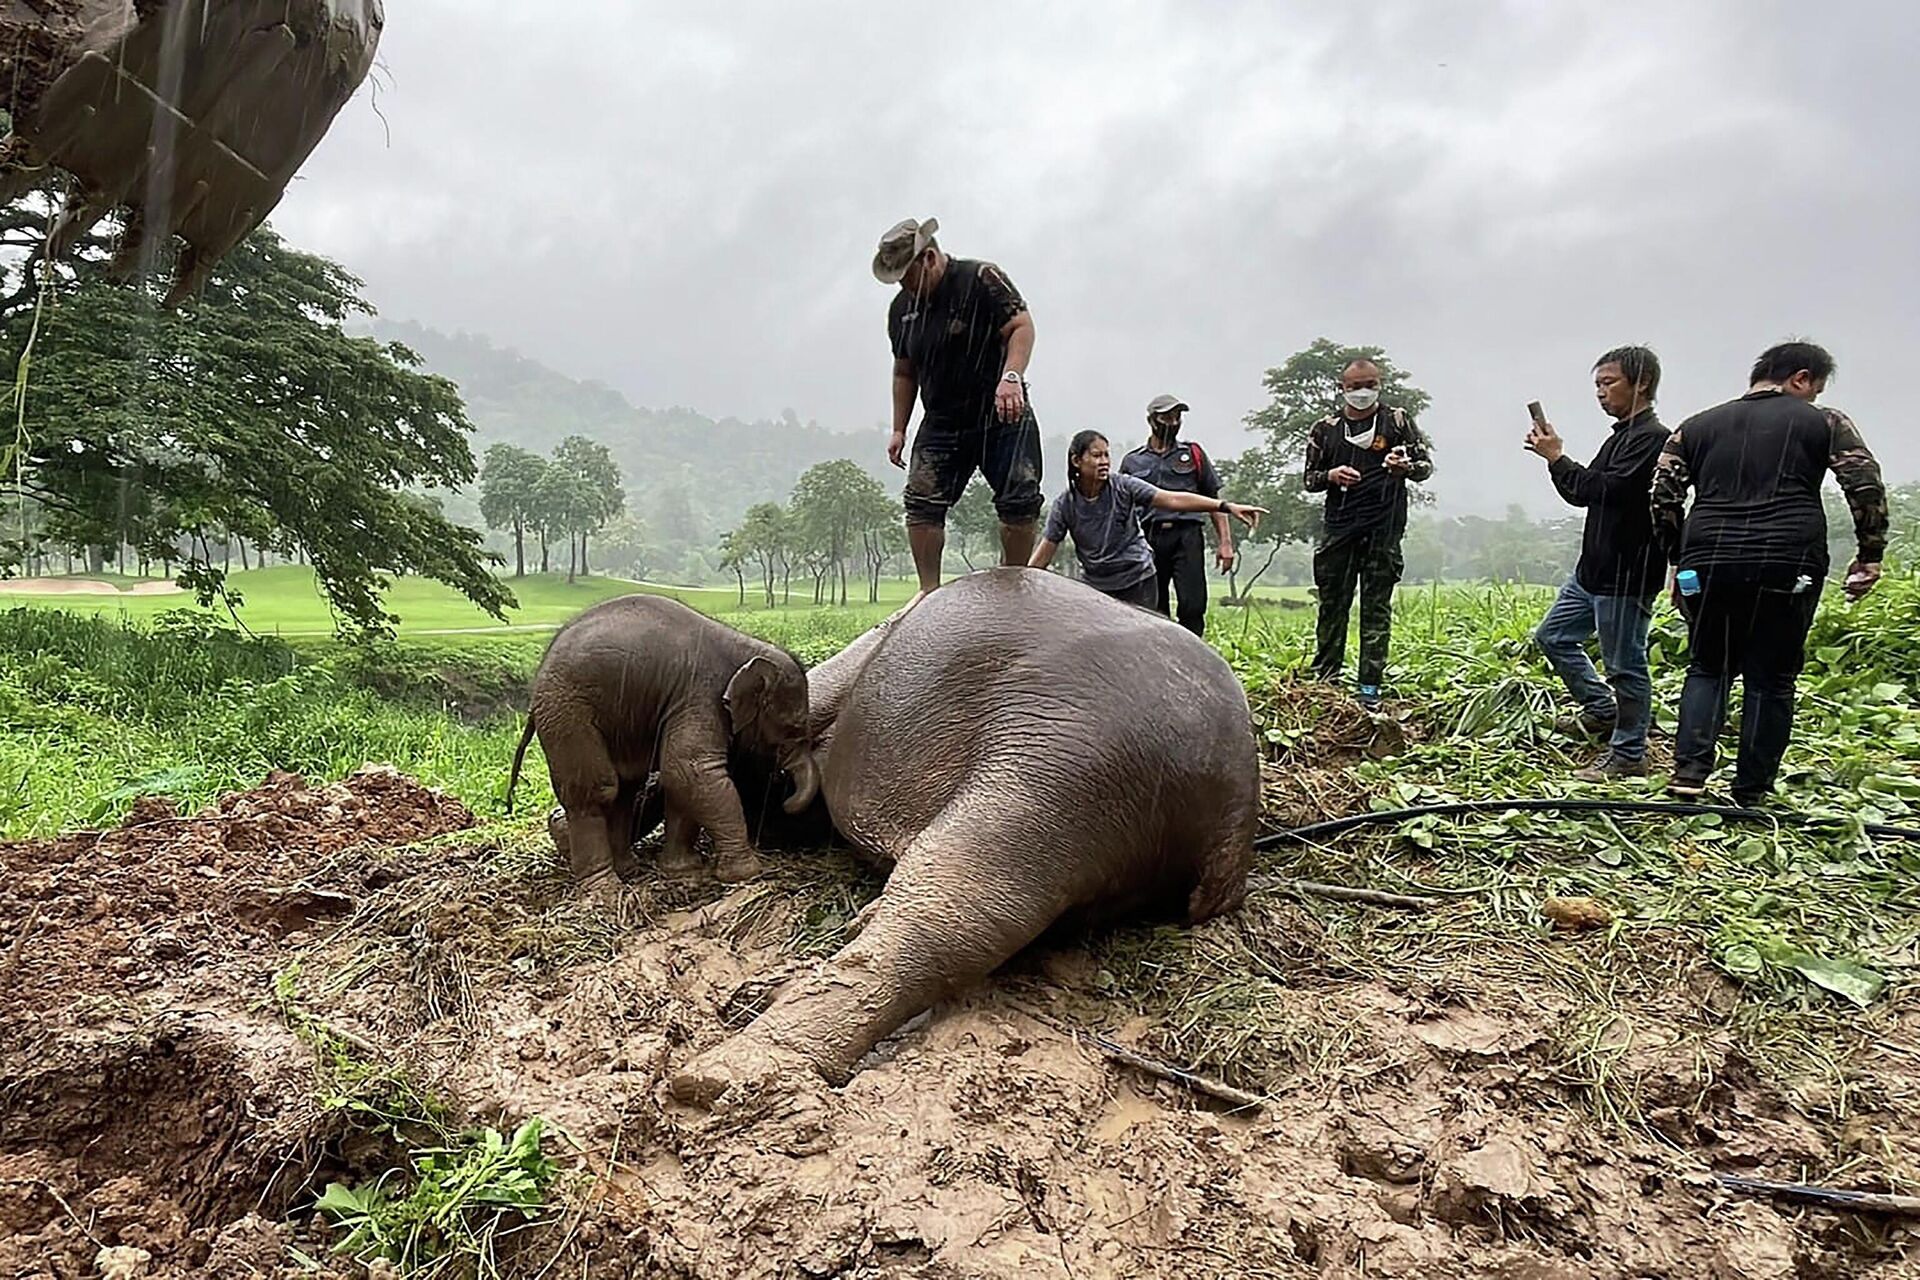 This handout photo taken and released on July 13, 2022 by Thailand's Department of National Parks, Wildlife and Plant Conservation shows an infant elephant standing next to a sedated adult elephant, following a rescue operation to recover the younger elephant after it fell into a hole, in Nakhon Nayok province in central Thailand. - Sputnik International, 1920, 15.07.2022